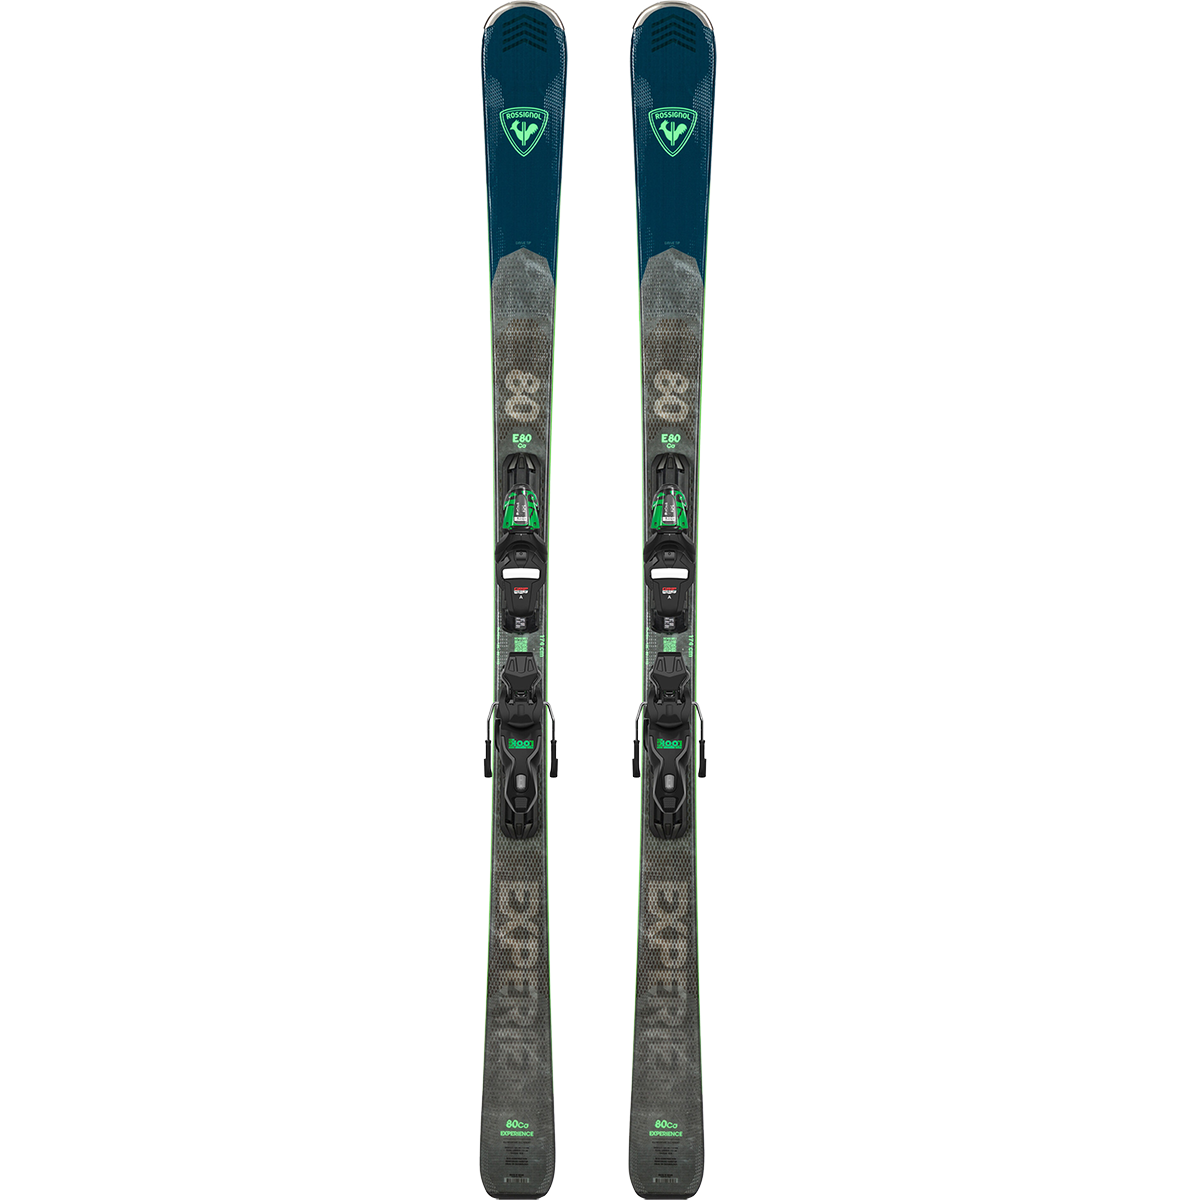 Experience 80 Carbon Ski with Xpress 11 Bindings alternate view